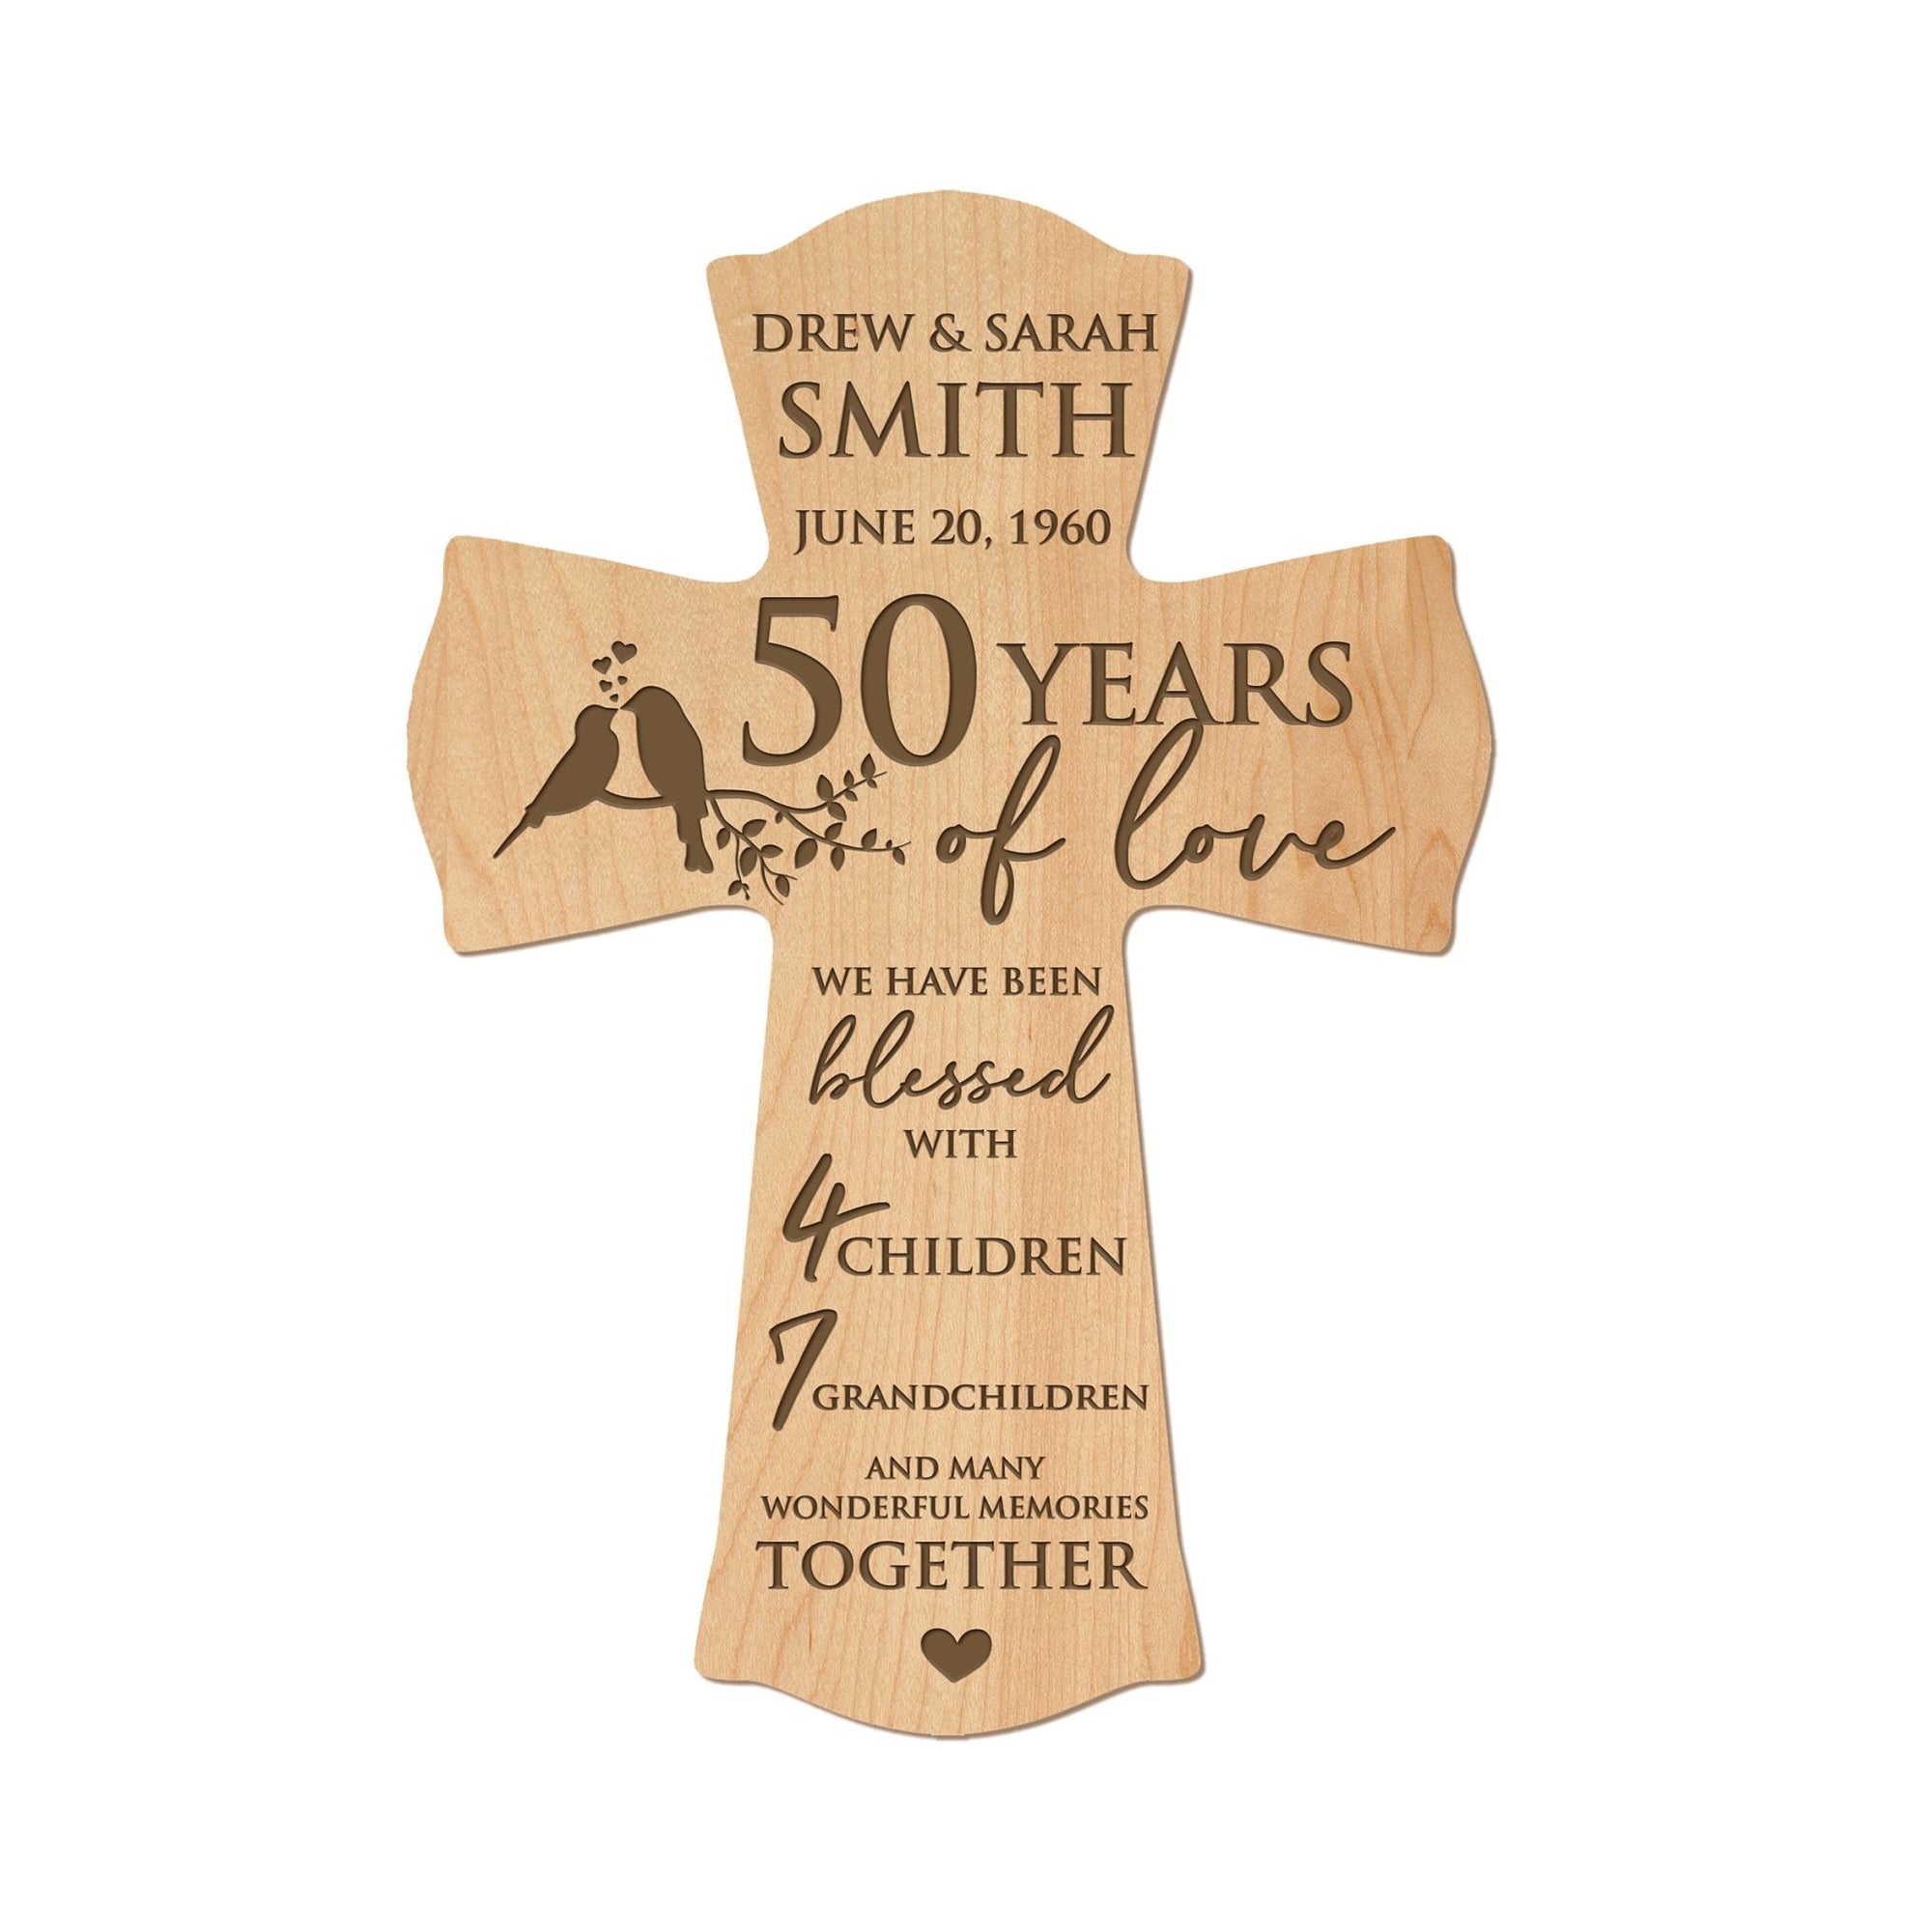 Lifesong Milestones Elegant Personalized Wall Cross – Ideal 50th Anniversary Gift for Couple